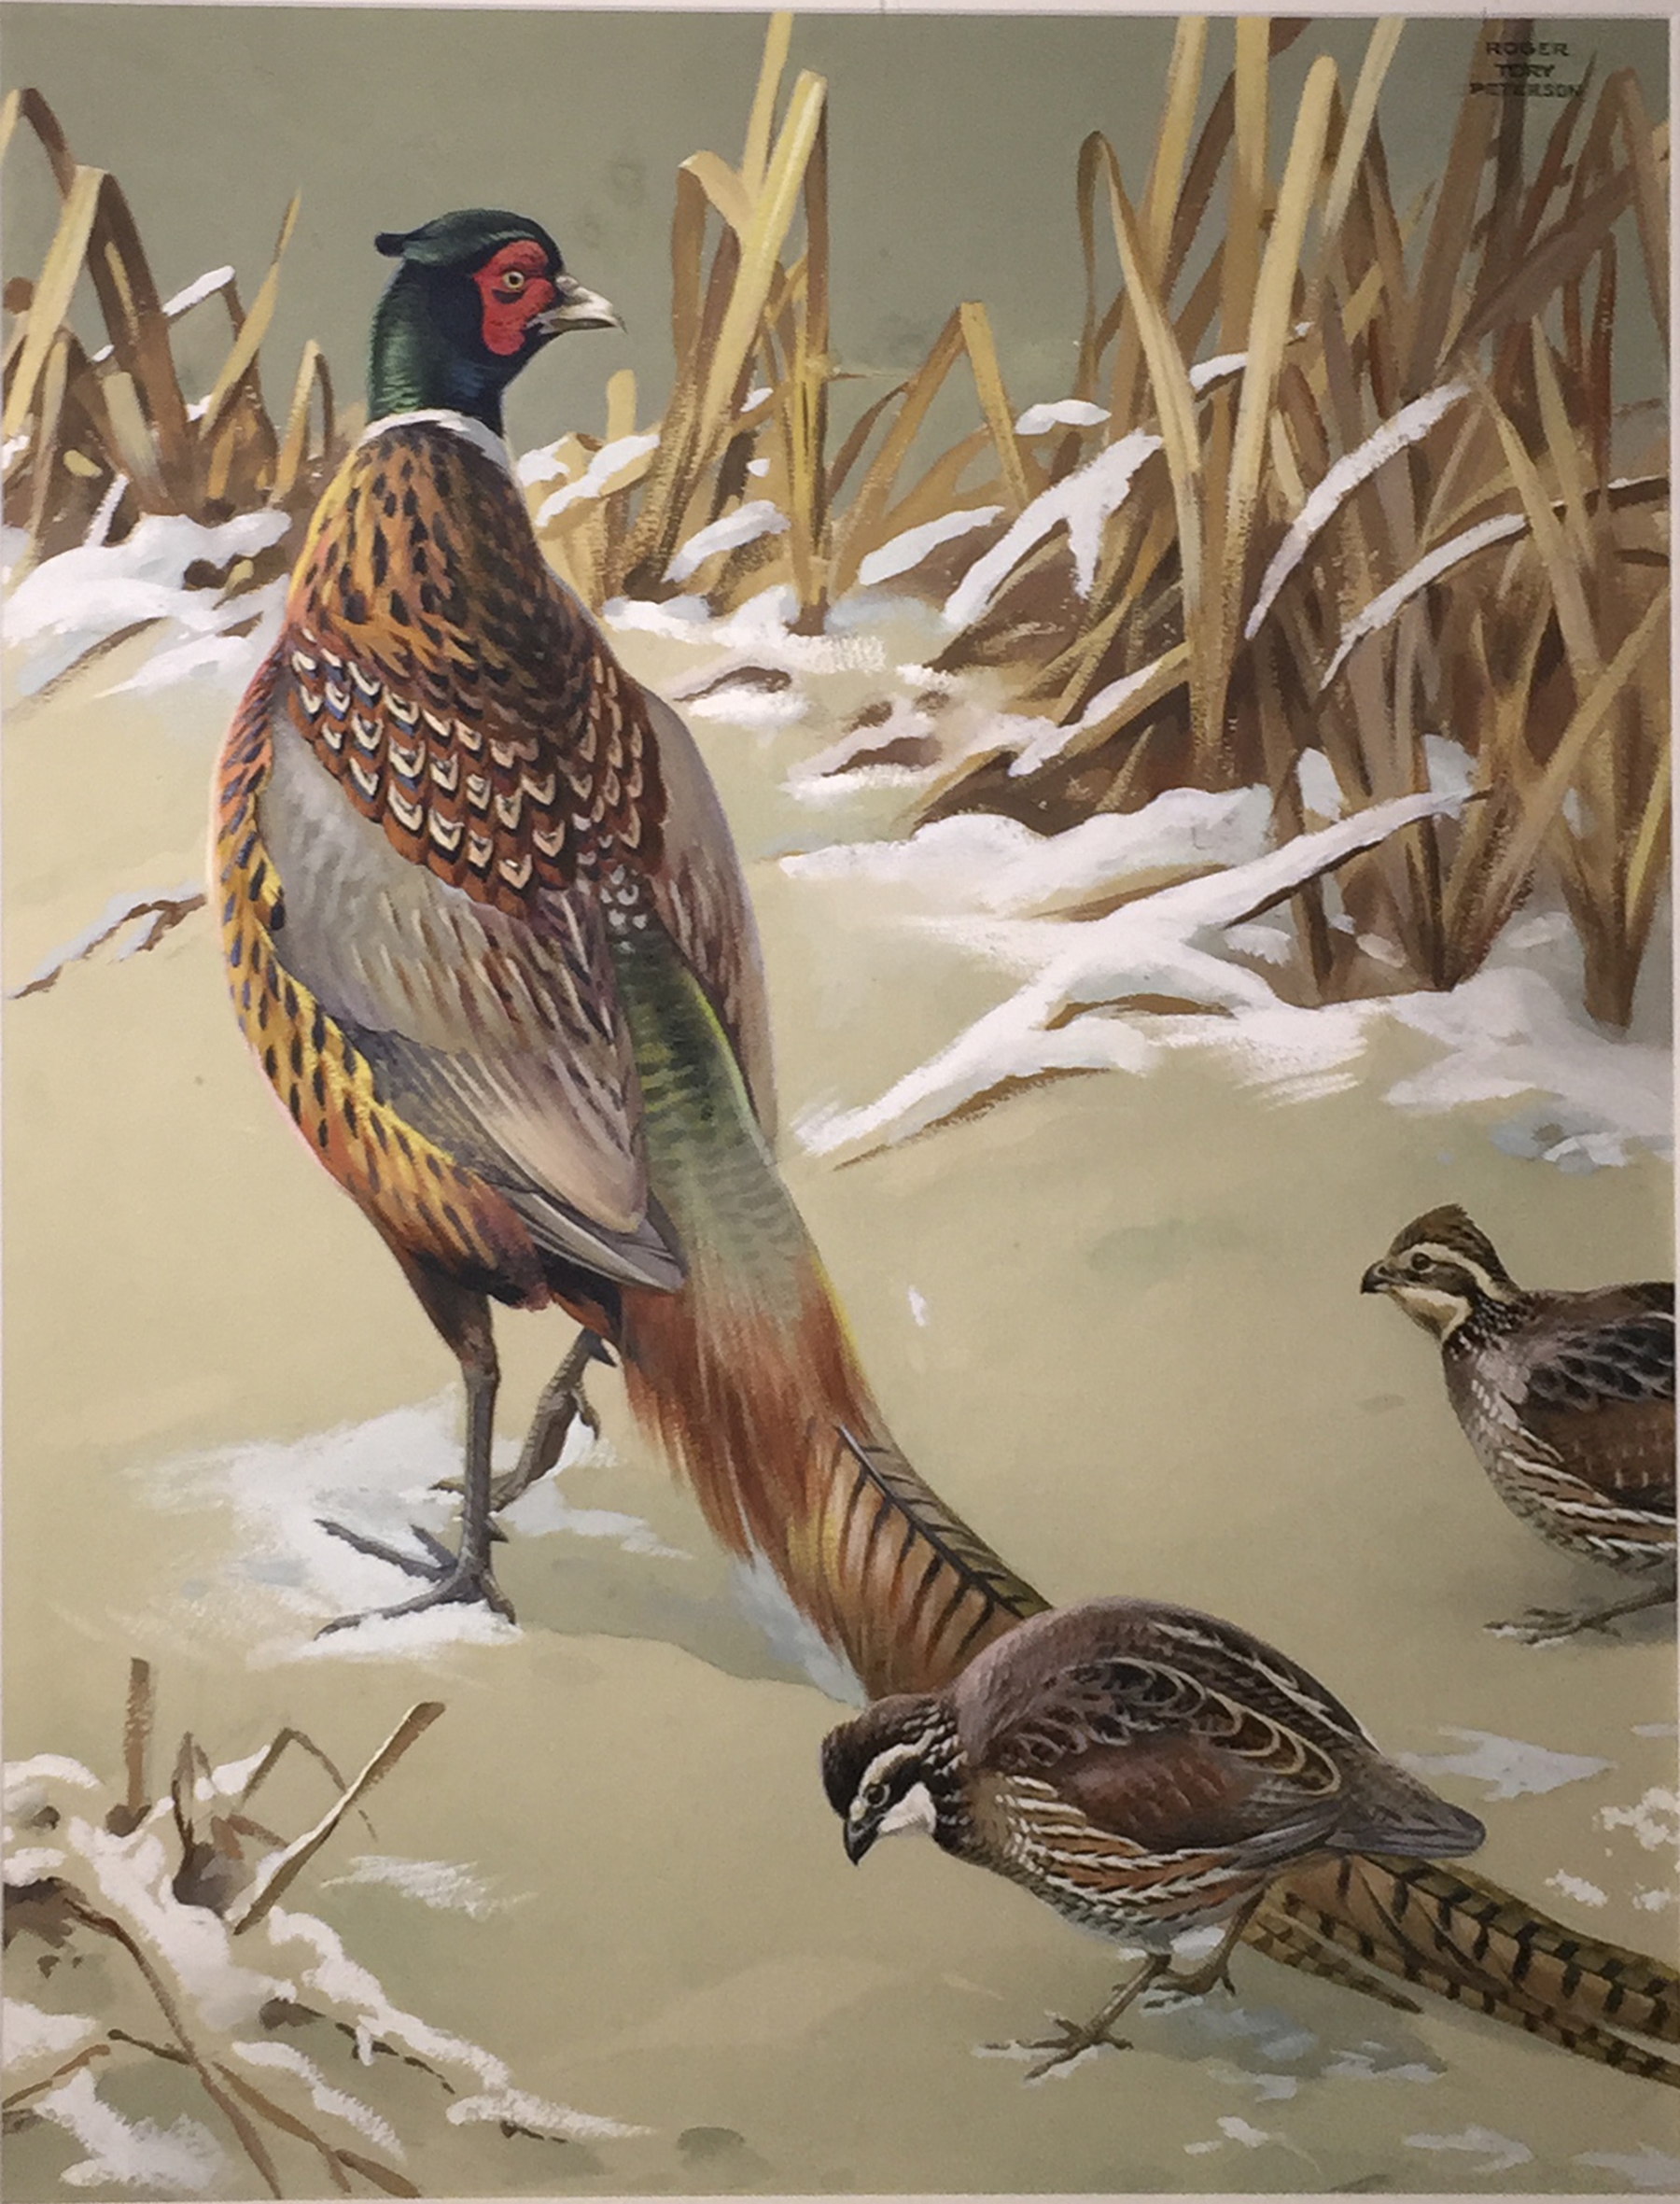 Artwork by Roger Tory Peterson, Pheasant and Quail, Made of Watercolor, gouache, pencil and ink on paperboard.